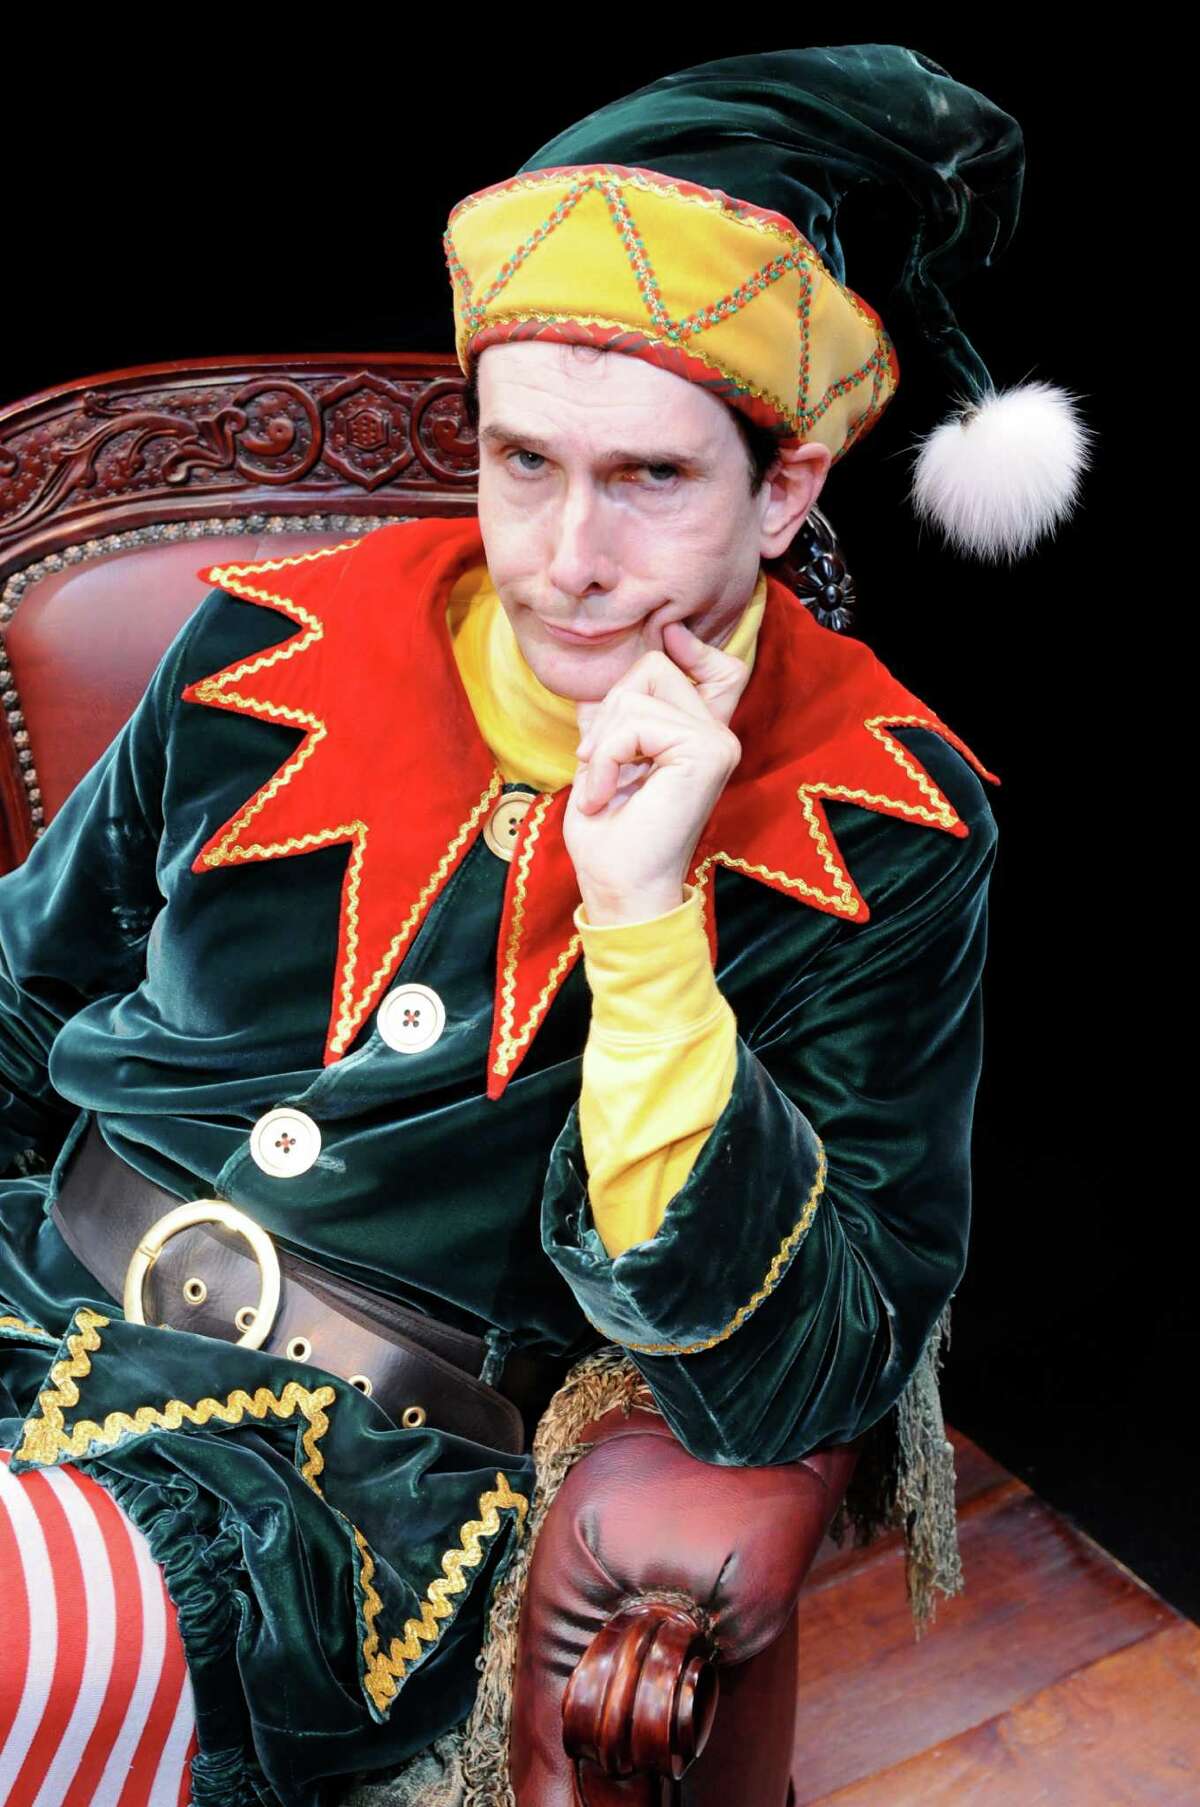 Todd Waite as Crumpet in The Alley Theatre's "The Santaland Diaries."